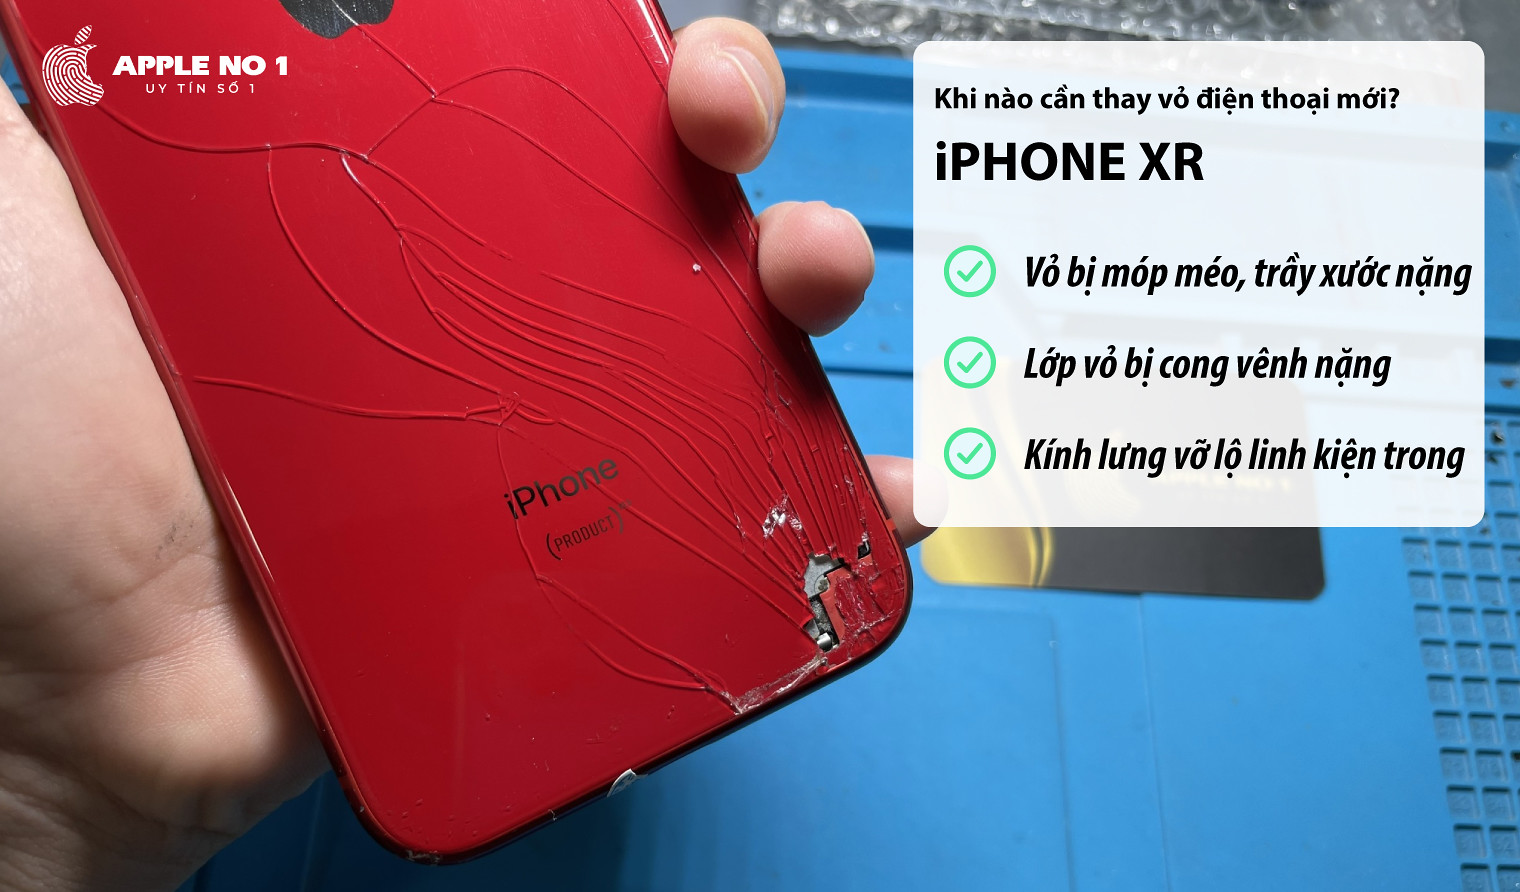 khi nao can thay vo iphone xr moi?